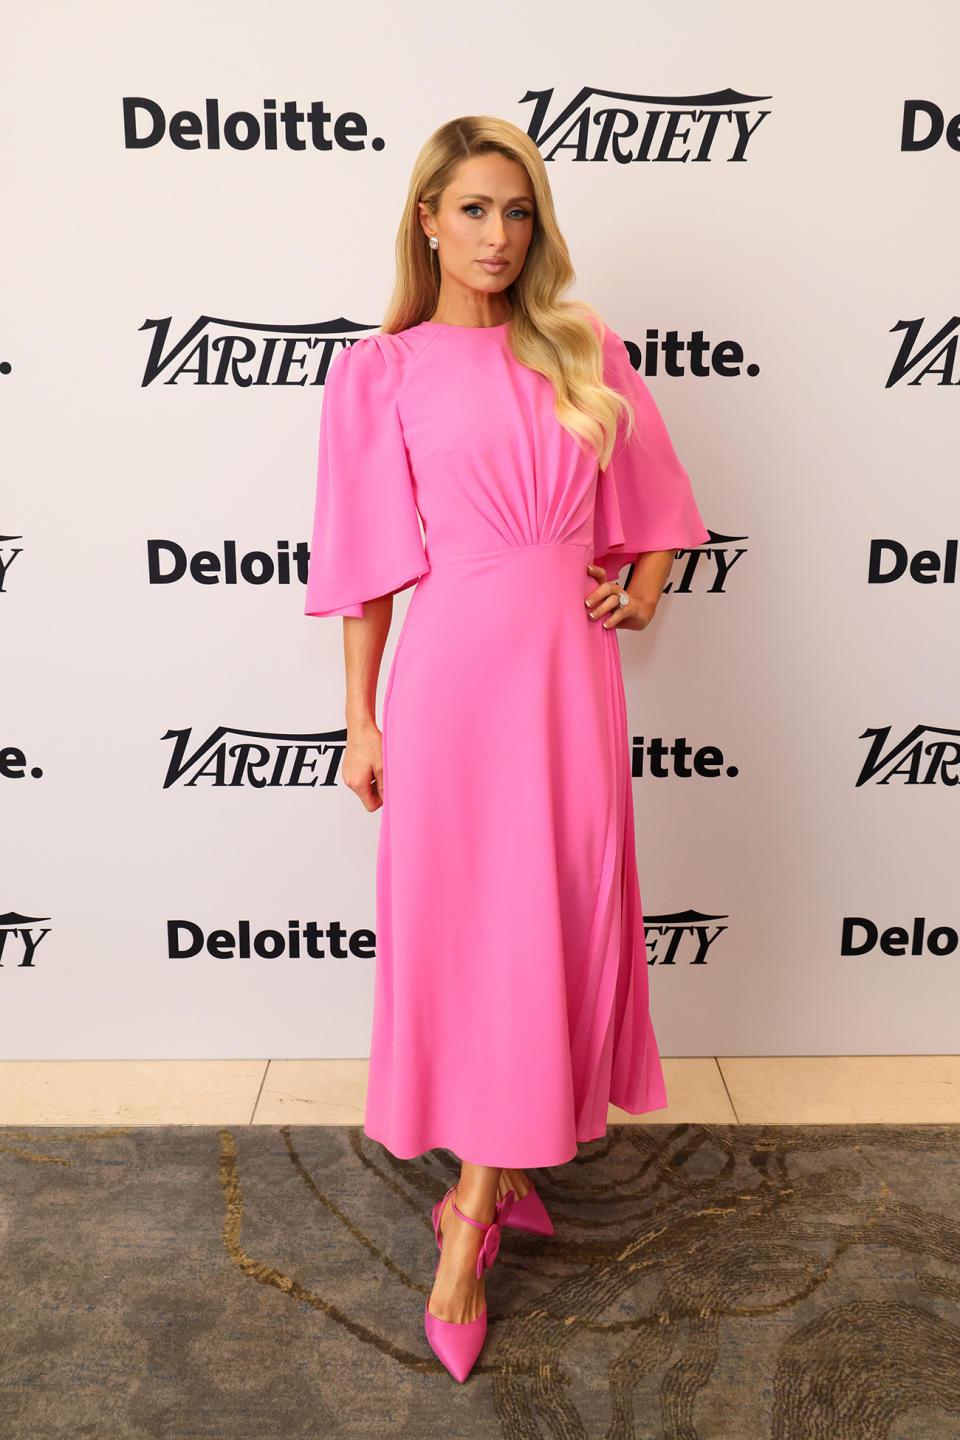 Paris Hilton Looks Pretty in Pink With Le Silla Shoes at Self-Tanner Launch